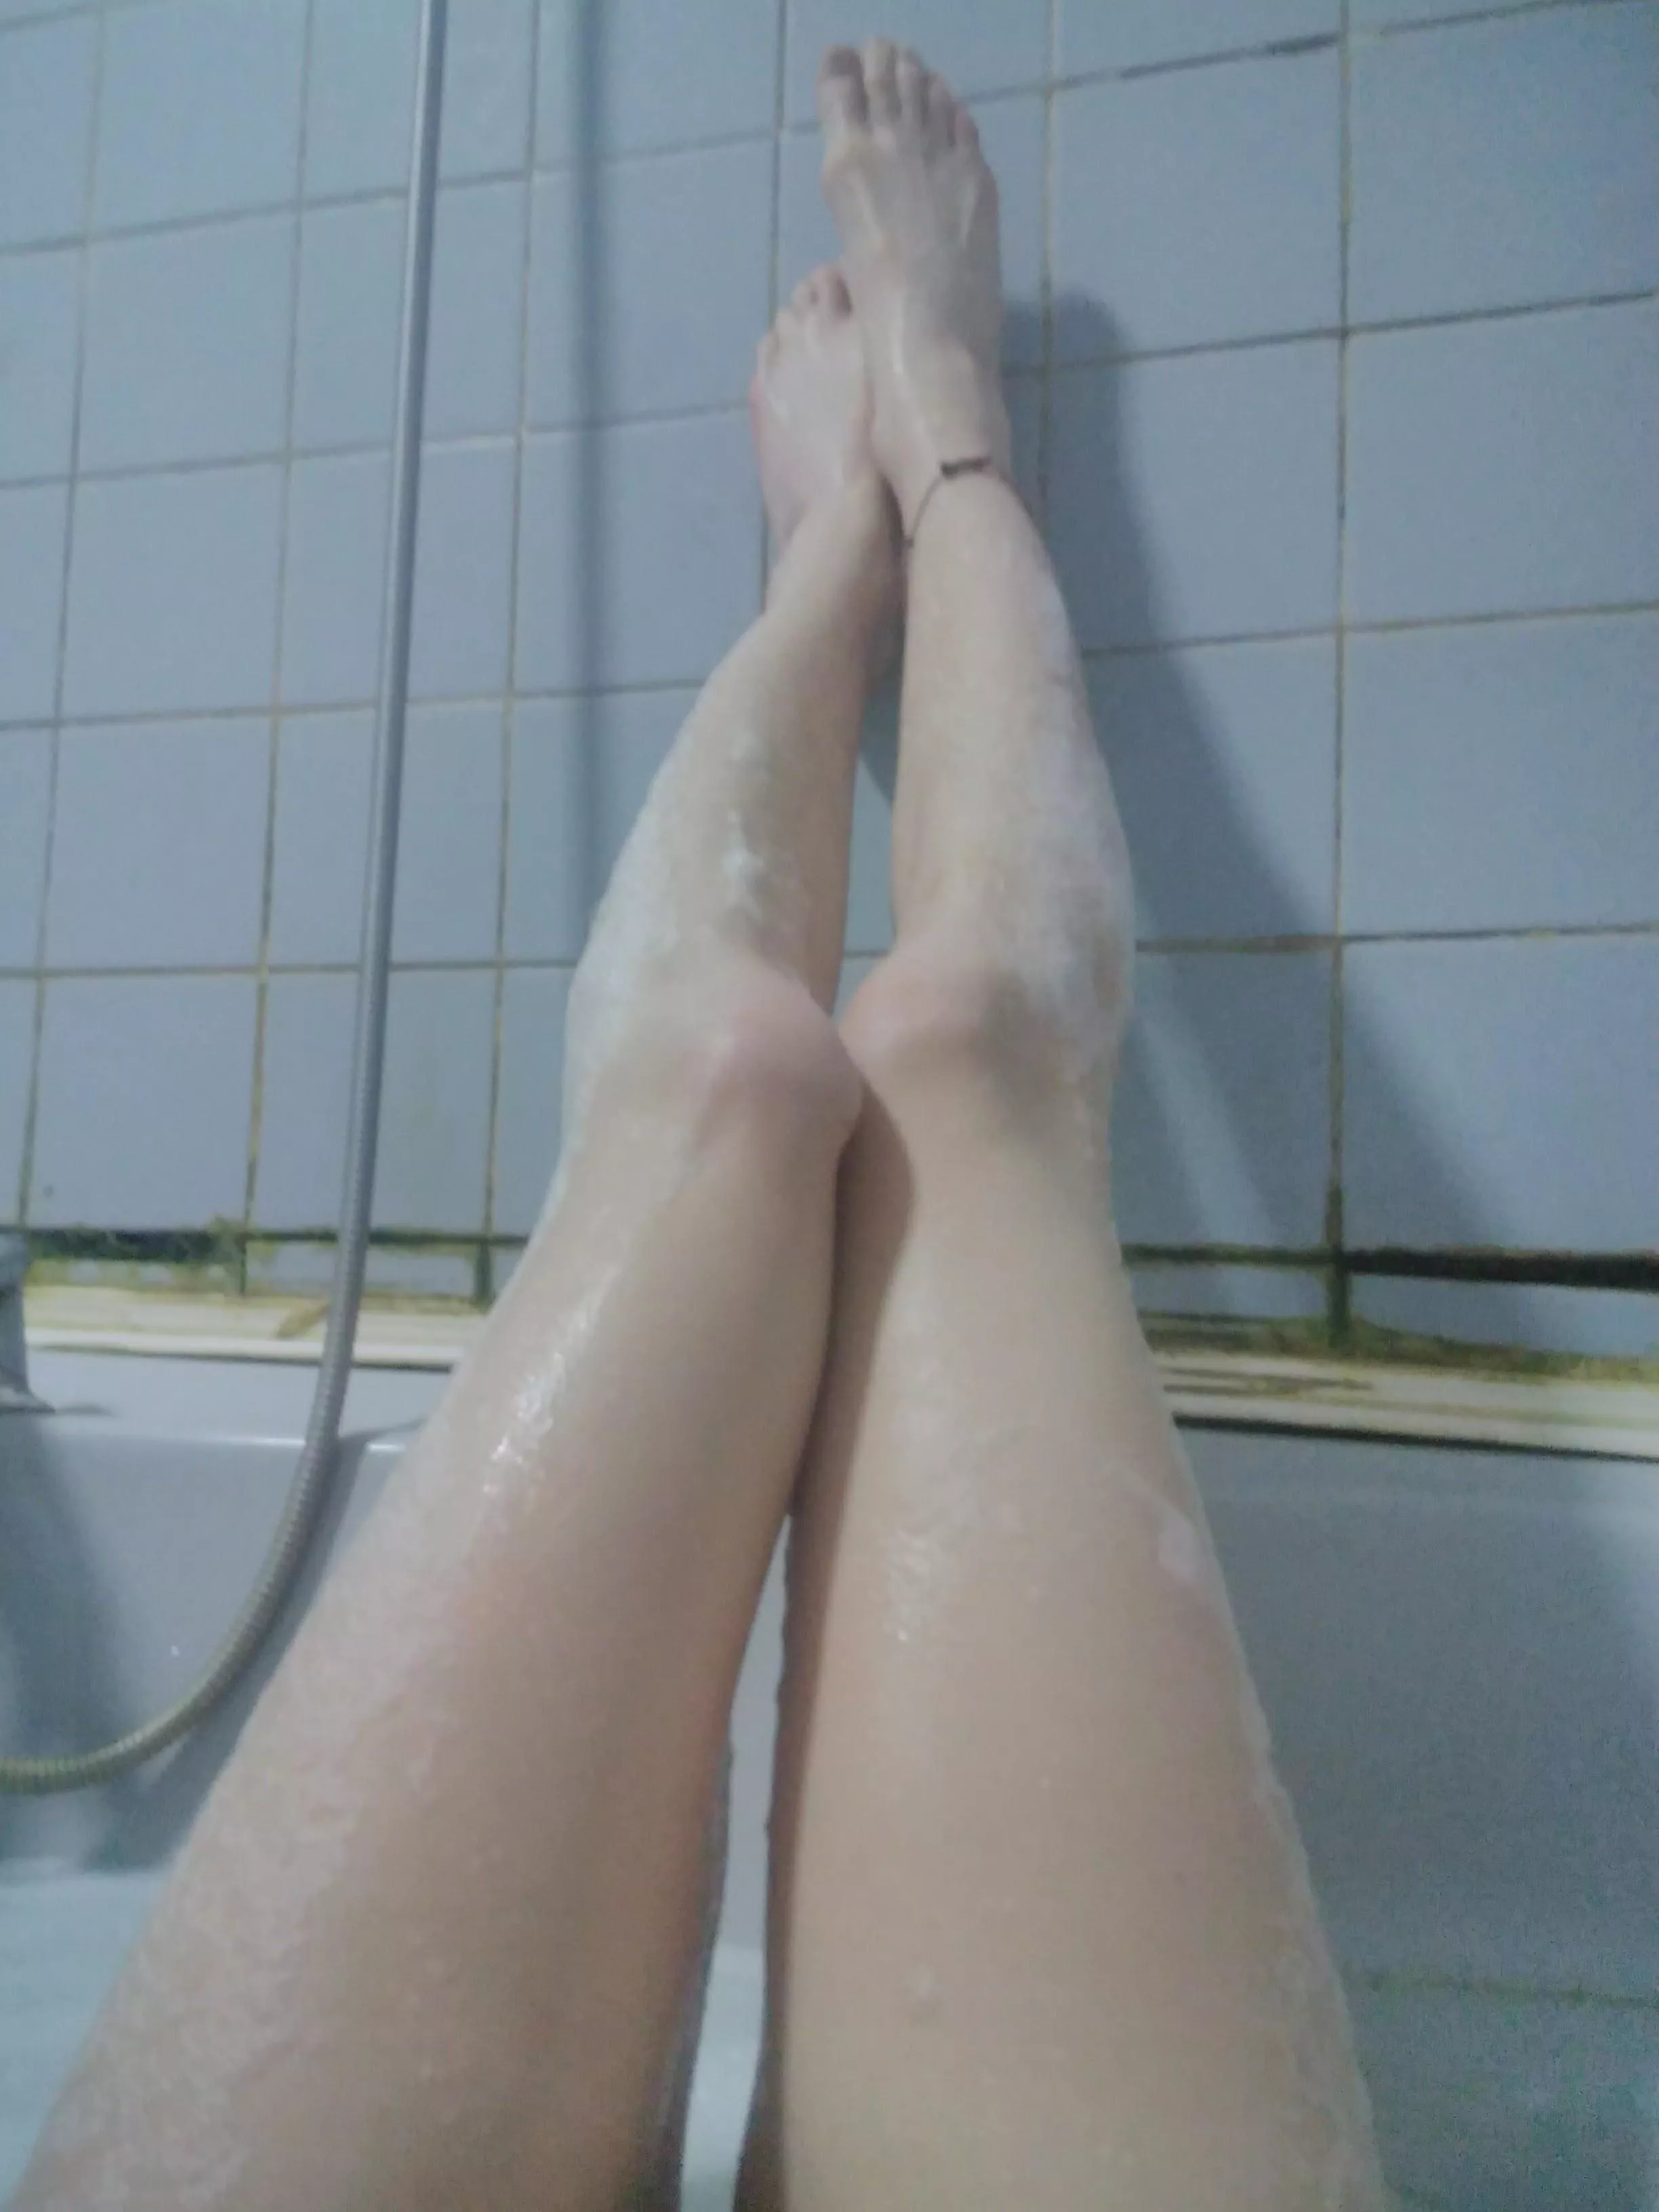 [f] Long, soapy legs in the bath. Hope you like them xx